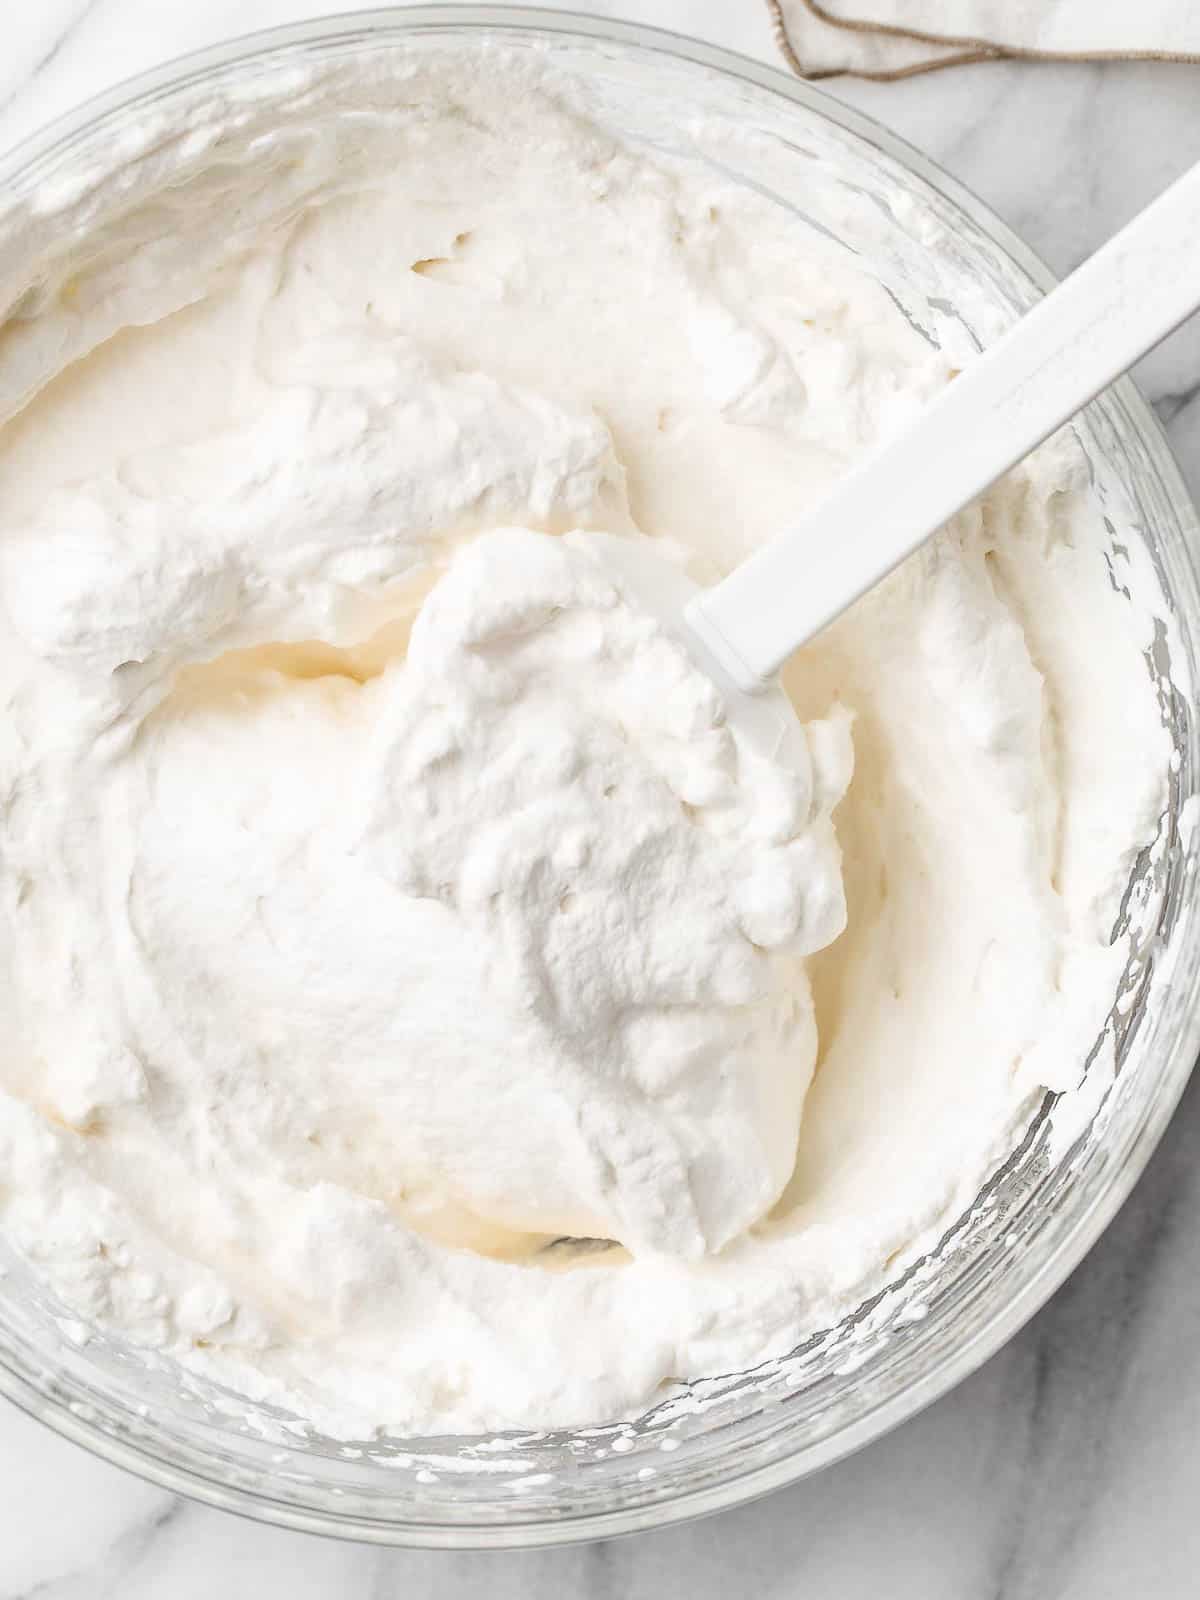 Top view of homemade whipped cream in a mixing bowl.